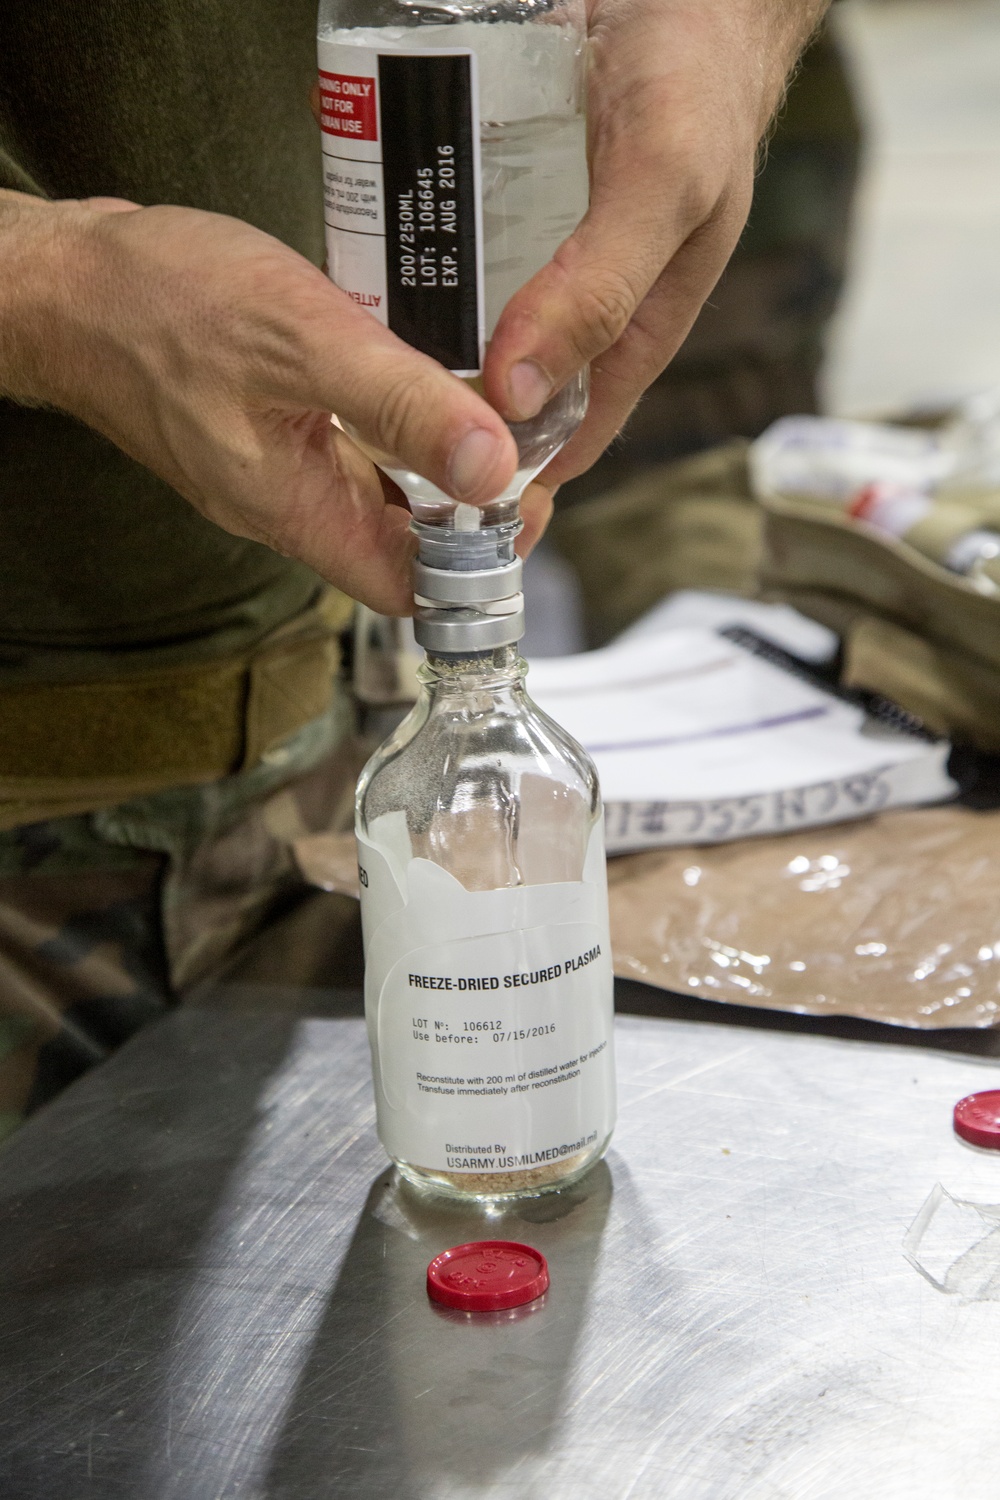 Rugged blood for rugged men: freeze-dried plasma saves a SOF life